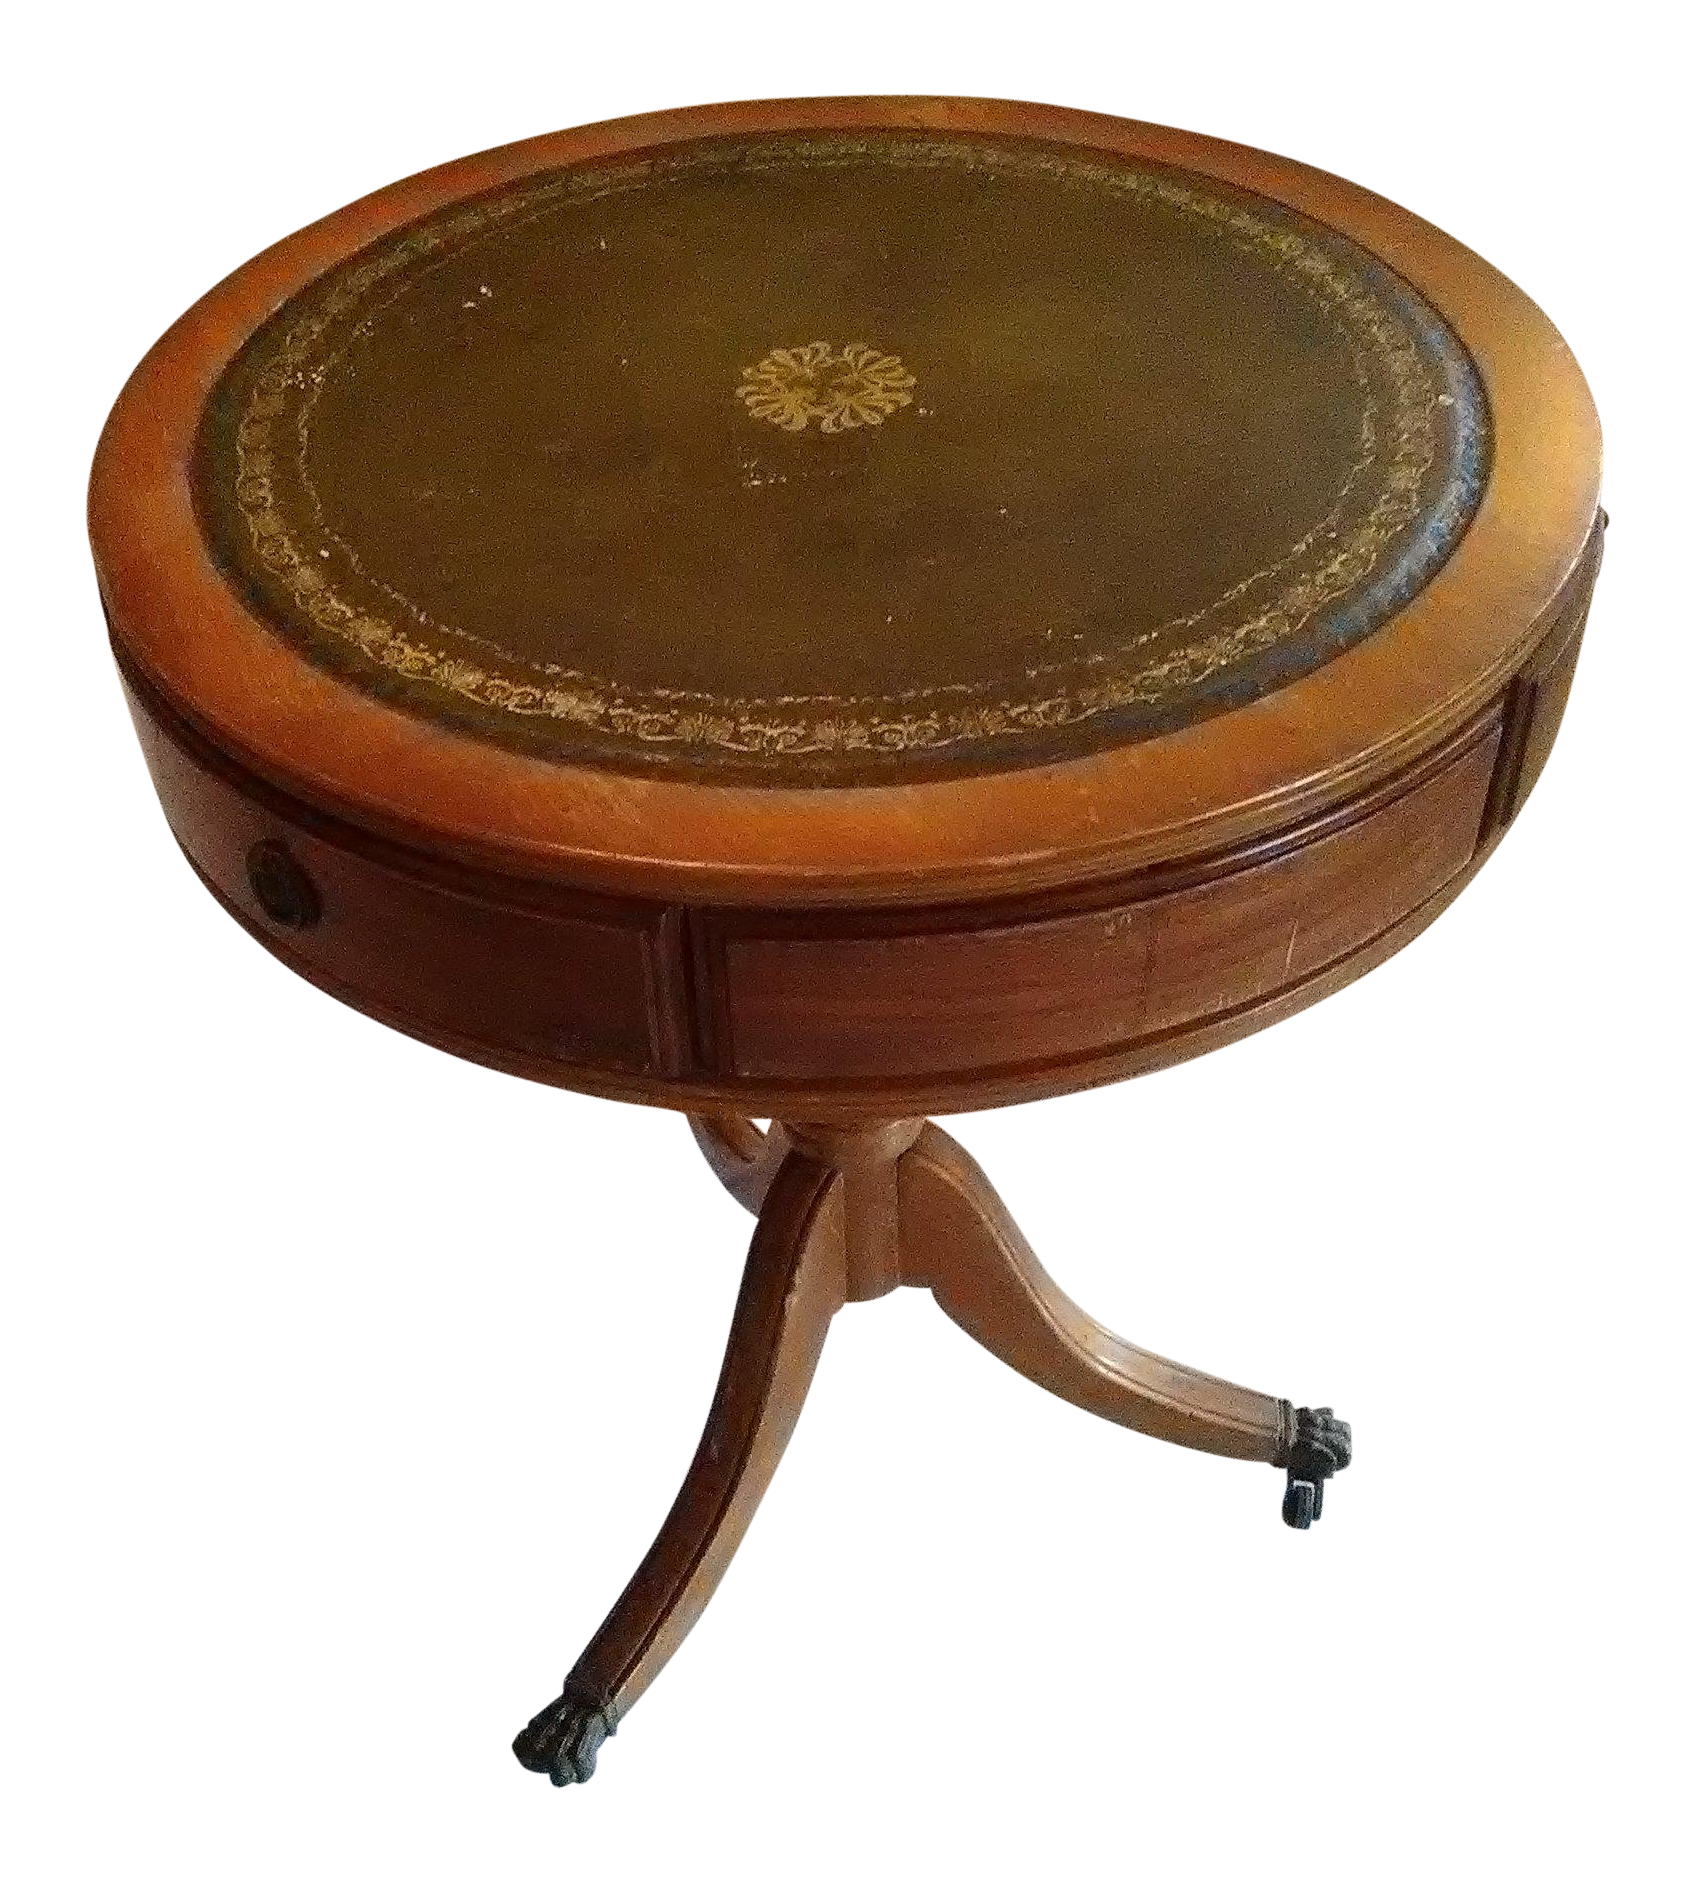 vintage mahogany leather top round drum side table and claw foot casters accent chairish barbie doll furniture cupcake carrier target repurposed wood end threshold marble pottery